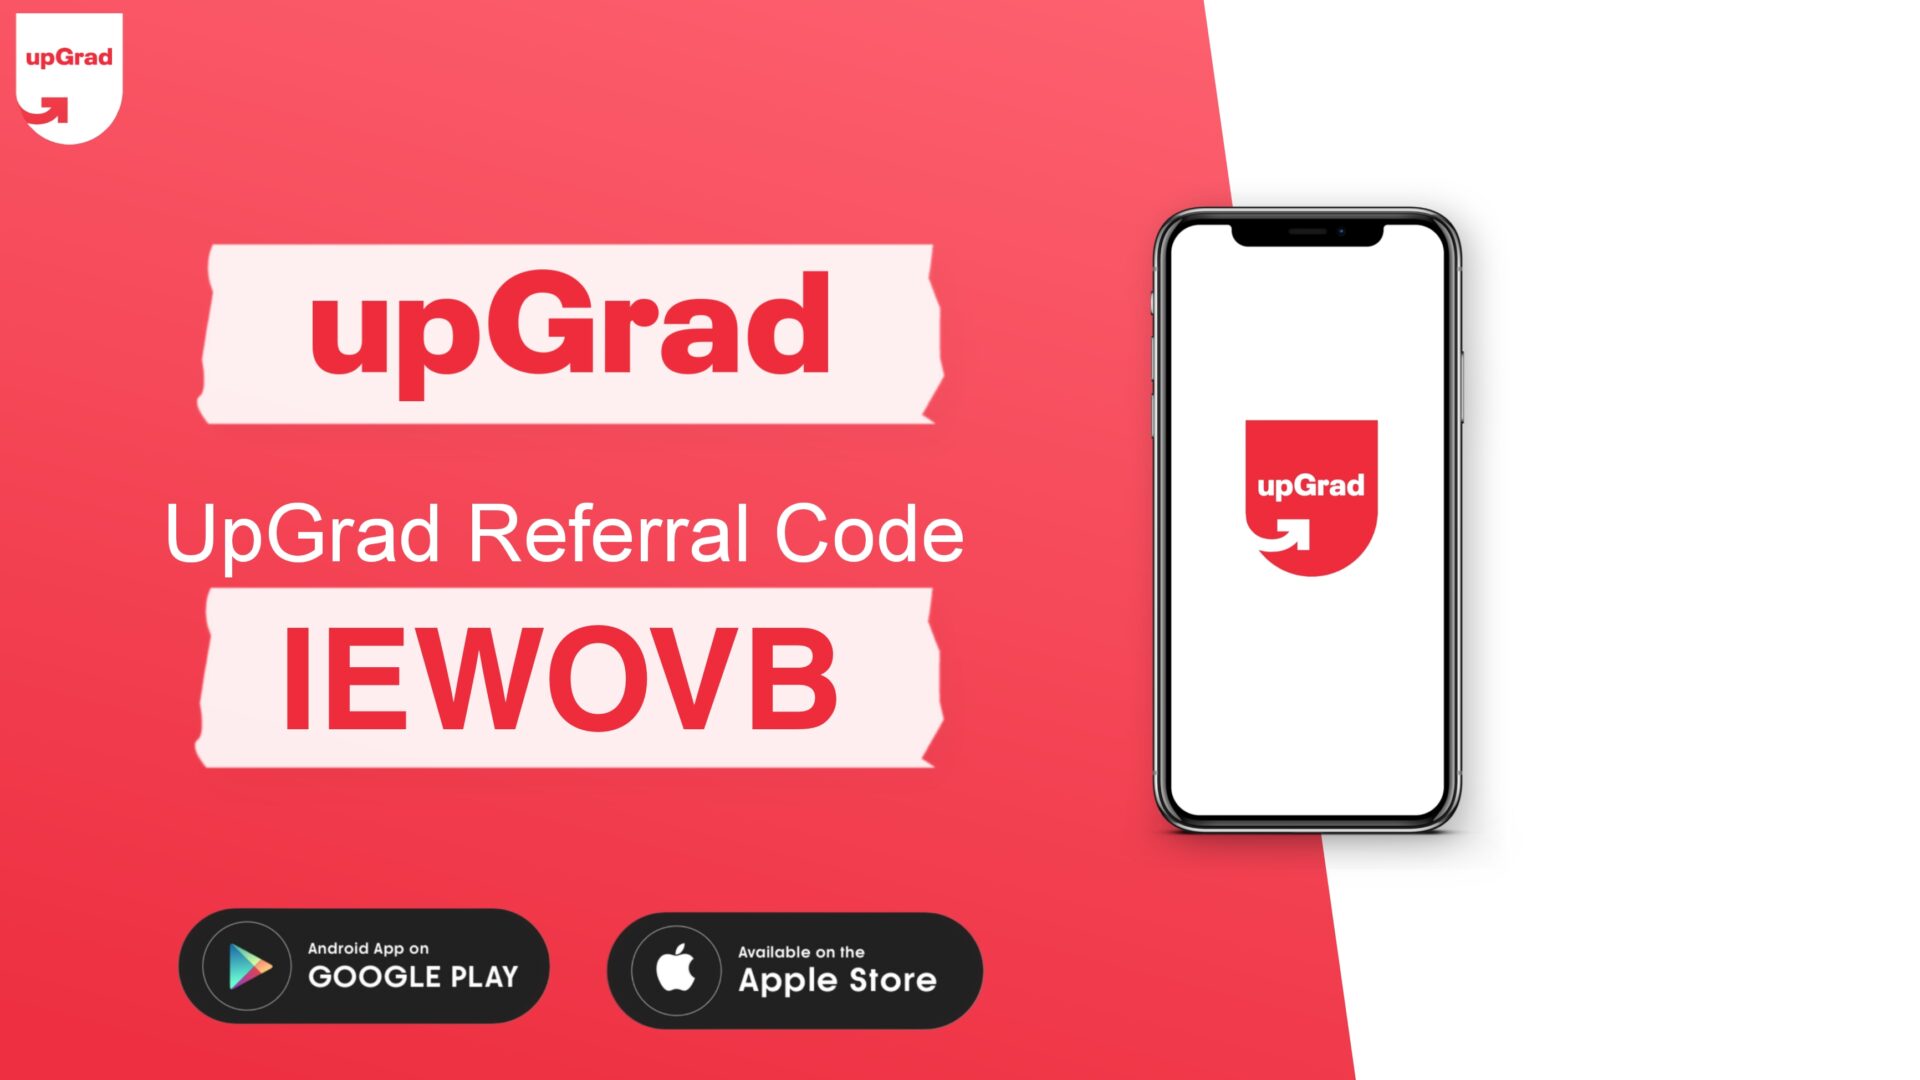 UpGrad Referral Code IEWOVB Get Discount Up To ₹ 85,000 On Courses